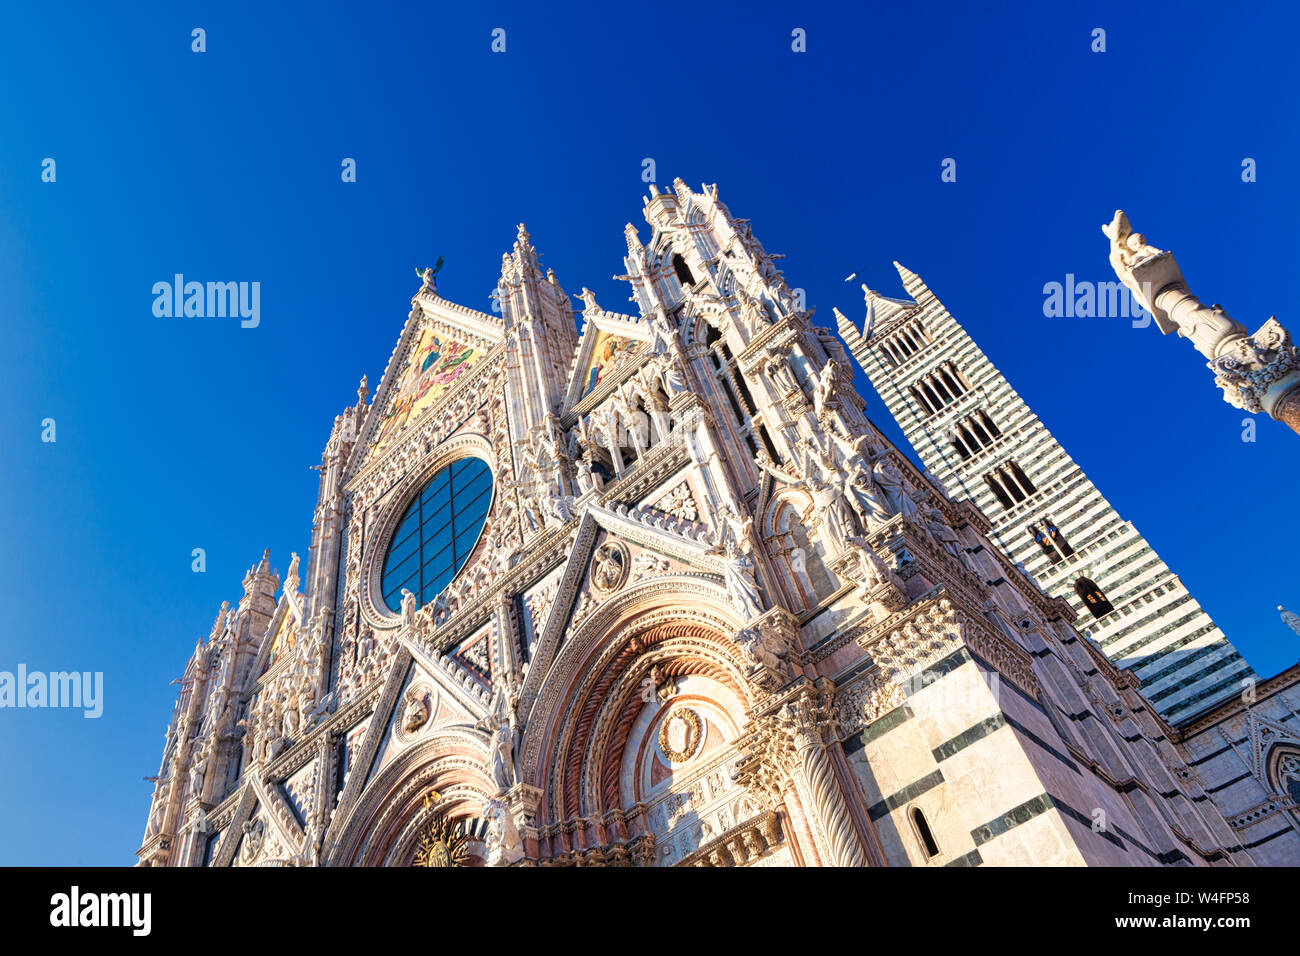 Sienna, Tuscany, Italy - 08-11-2011: view on the famous Duomo di Siena in Sienna with a blue sky and sunshine. A popular tourist destination Stock Photo